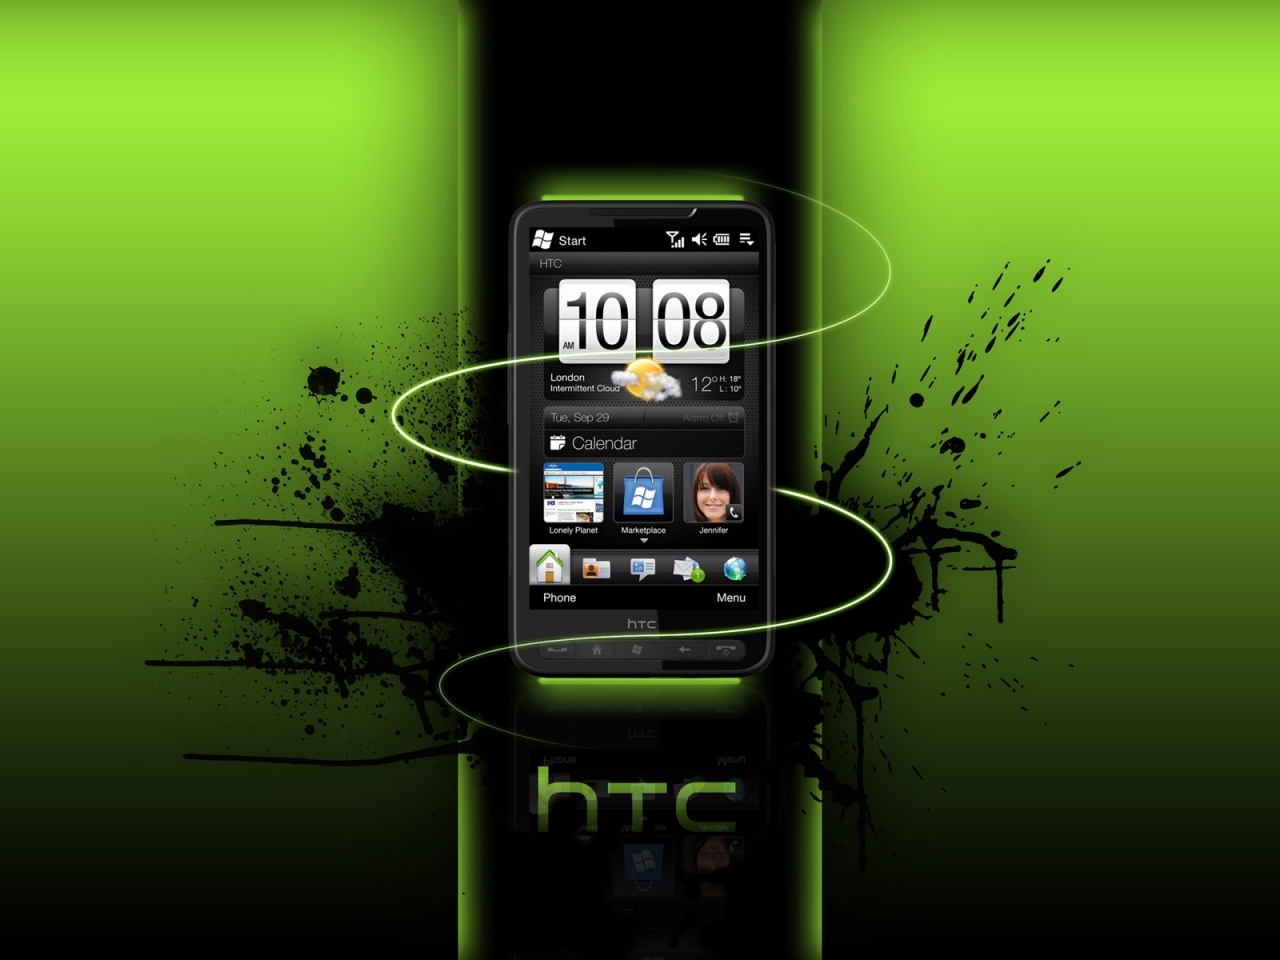 HTC Smartphone for 1280 x 960 resolution